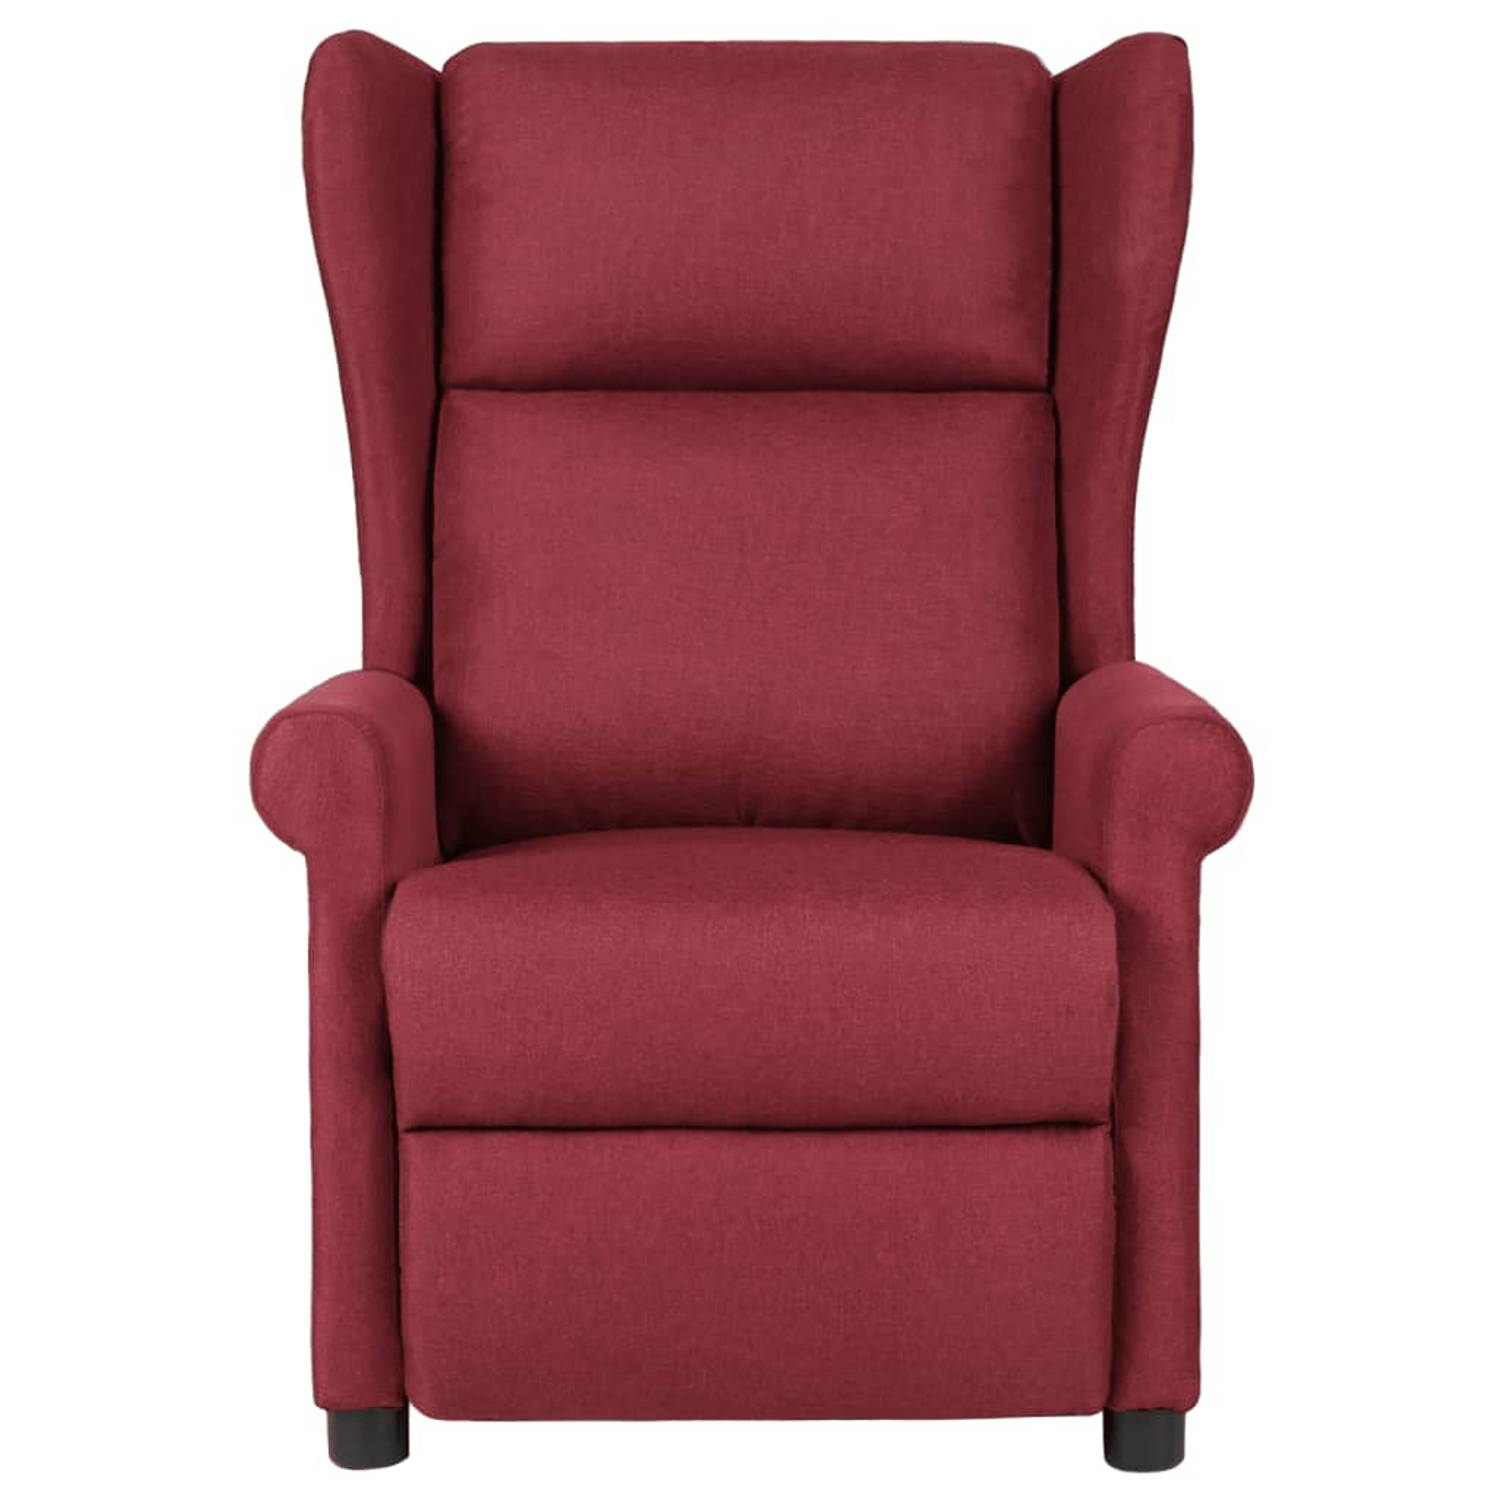 The Living Store Leunstoel stof wijnrood - Fauteuil